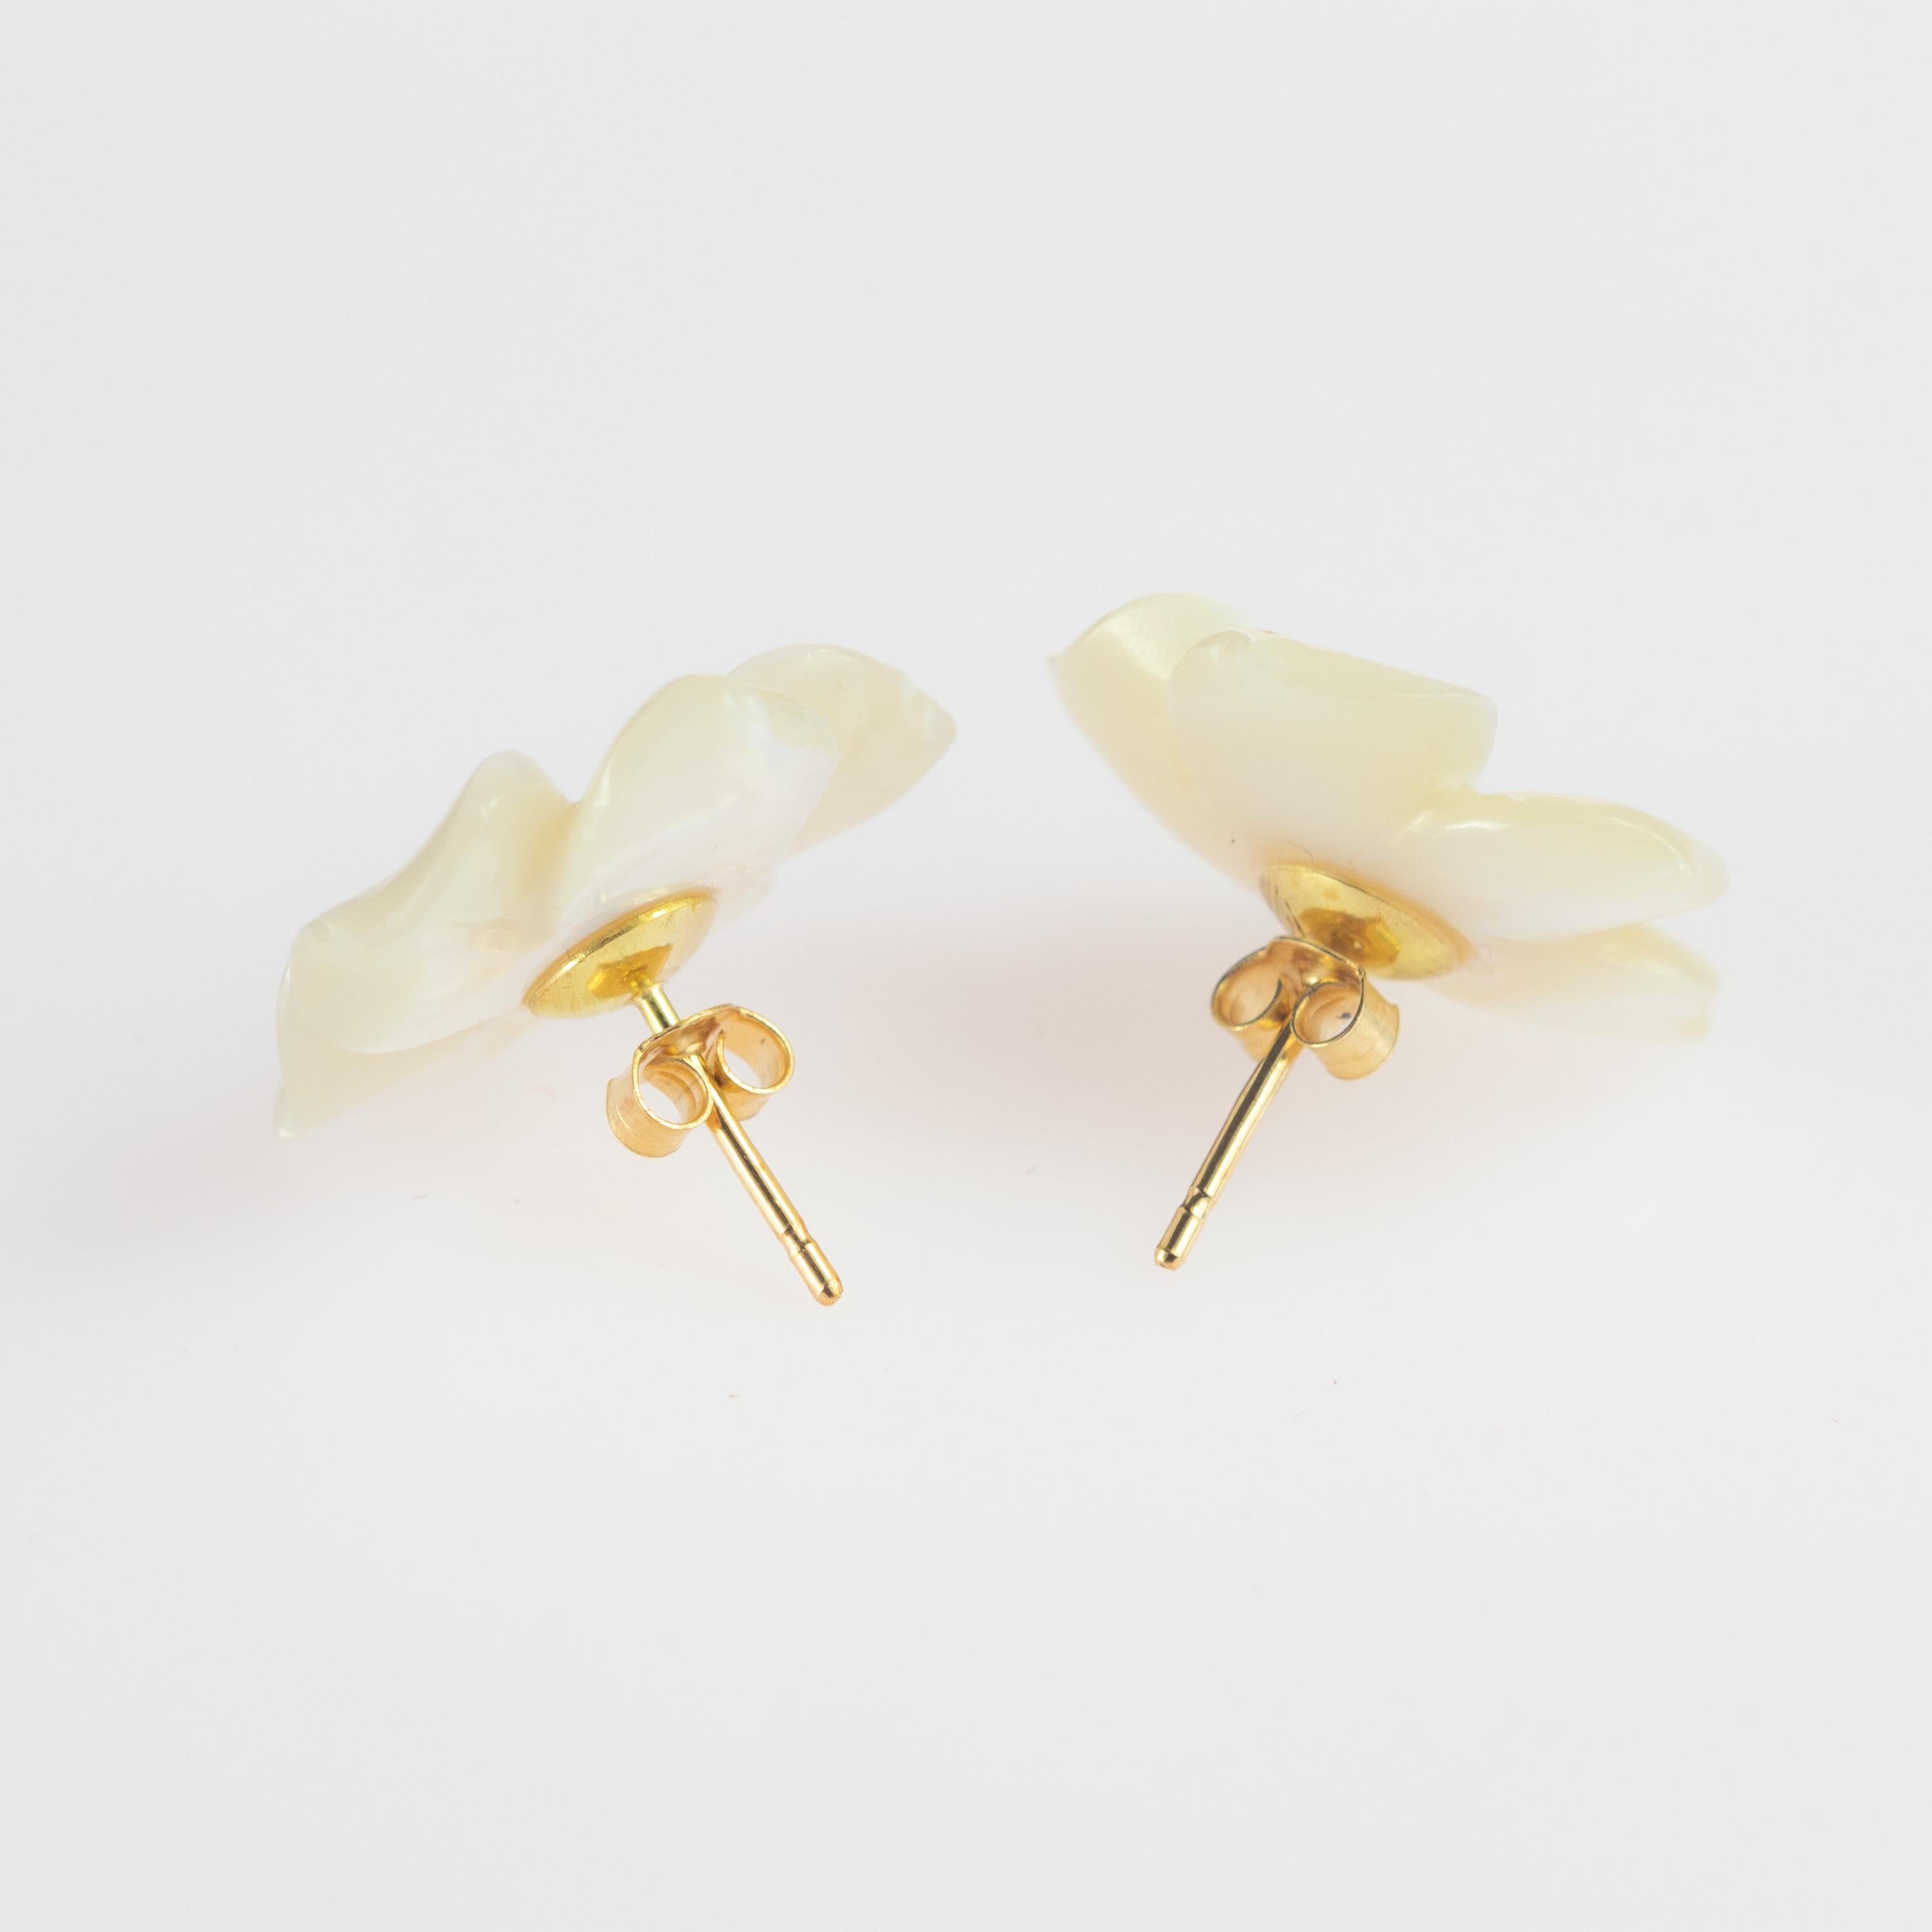 Artisan Intini Jewels Mother of Pearl Carved White Flower 9 Karat Gold Stud Earrings For Sale